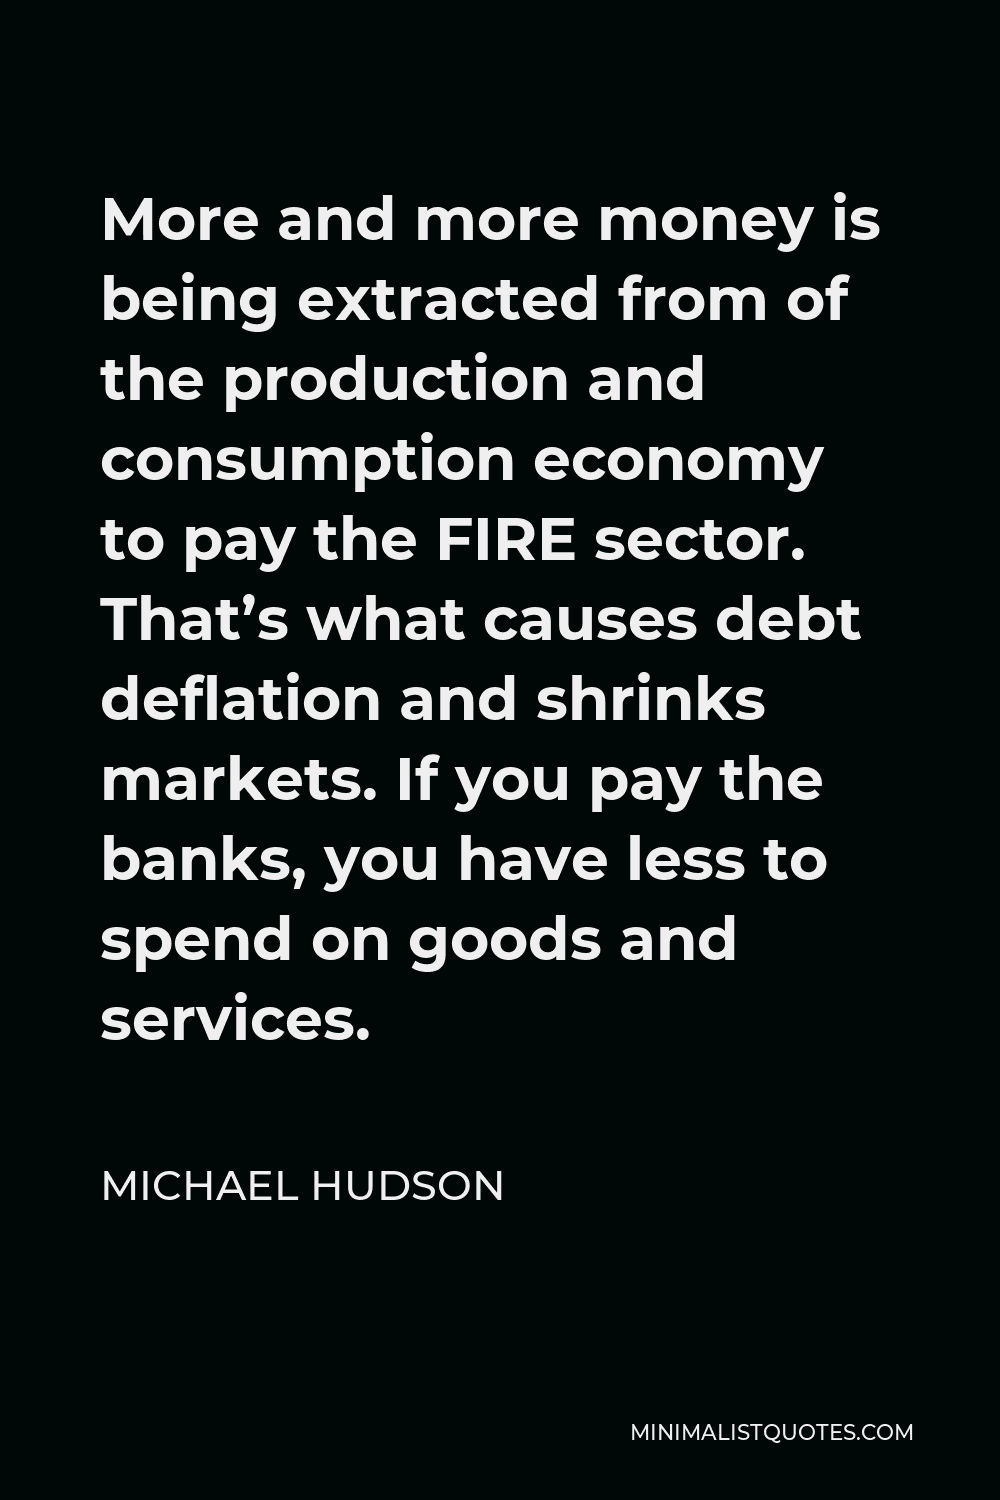 Michael Hudson Quote - More and more money is being extracted from of the production and consumption economy to pay the FIRE sector. That’s what causes debt deflation and shrinks markets. If you pay the banks, you have less to spend on goods and services.